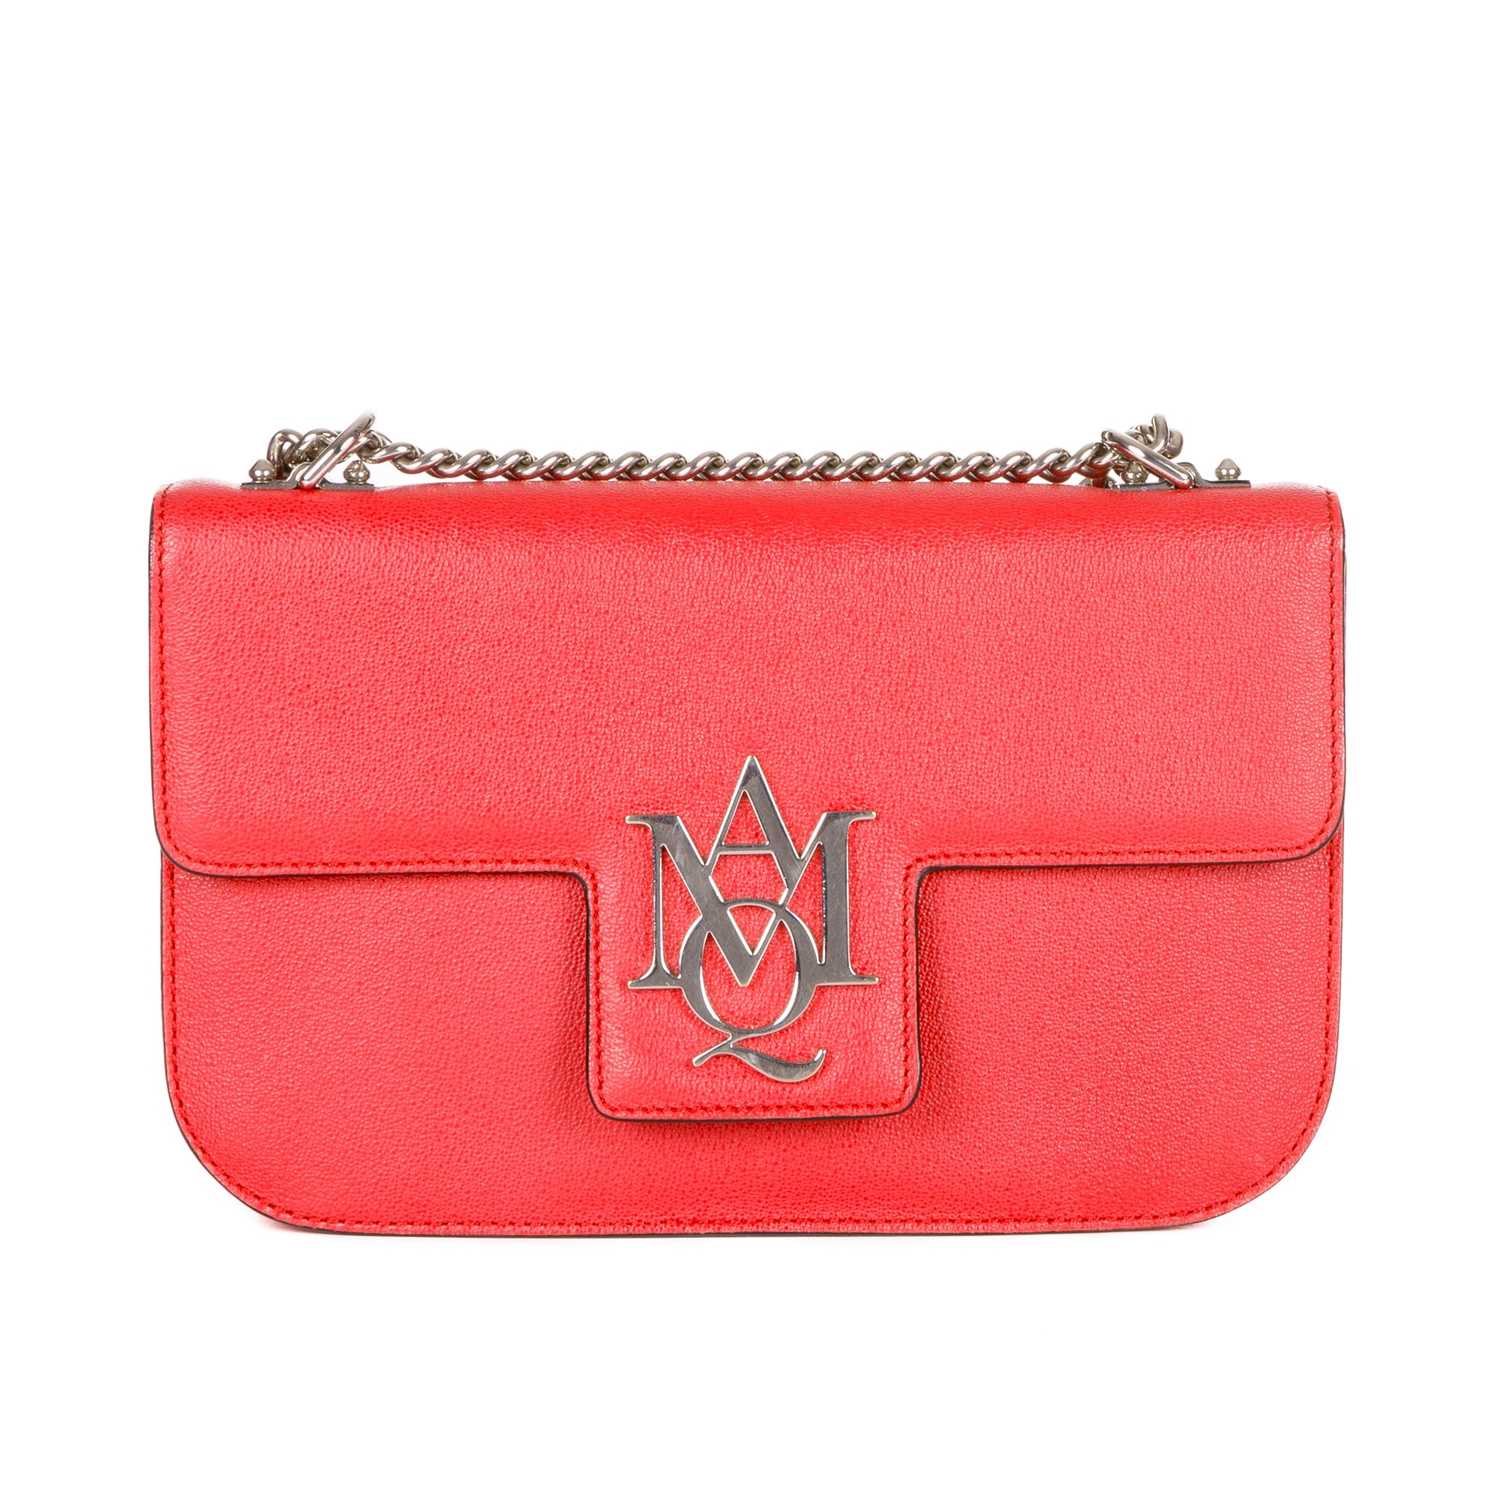 Alexander McQueen, an AMQ Insignia Chain handbag, crafted from red calfskin leather, with polished - Image 2 of 5